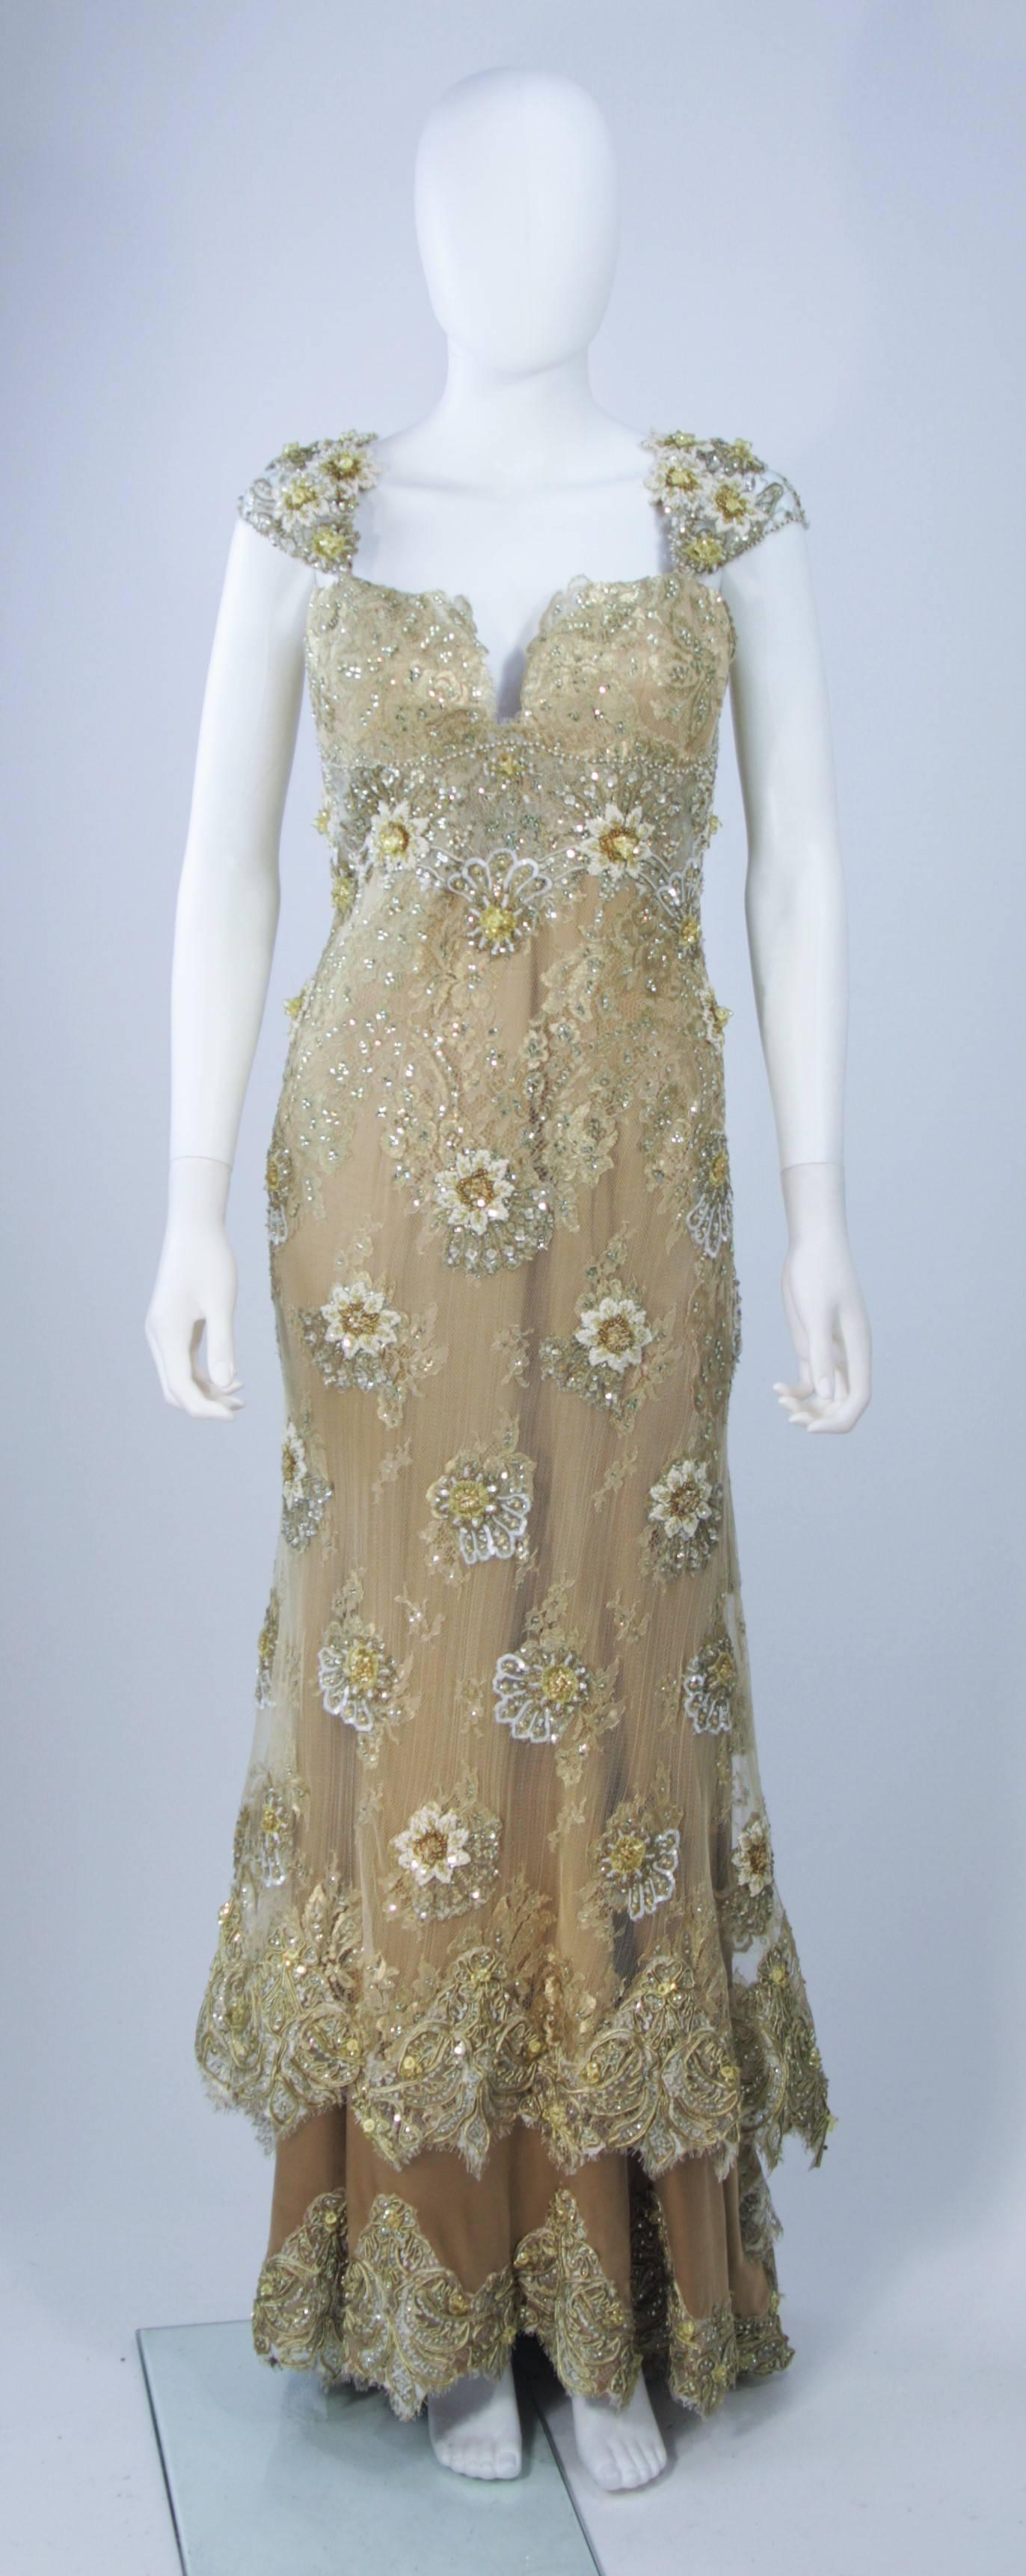  This Barraci gown is composed of a gold and yellow lace/silk combination which is embellished with rhinestones. There is a boned foundation, center back zipper closure, and corset style lace up back. In excellent vintage condition. 

**Please